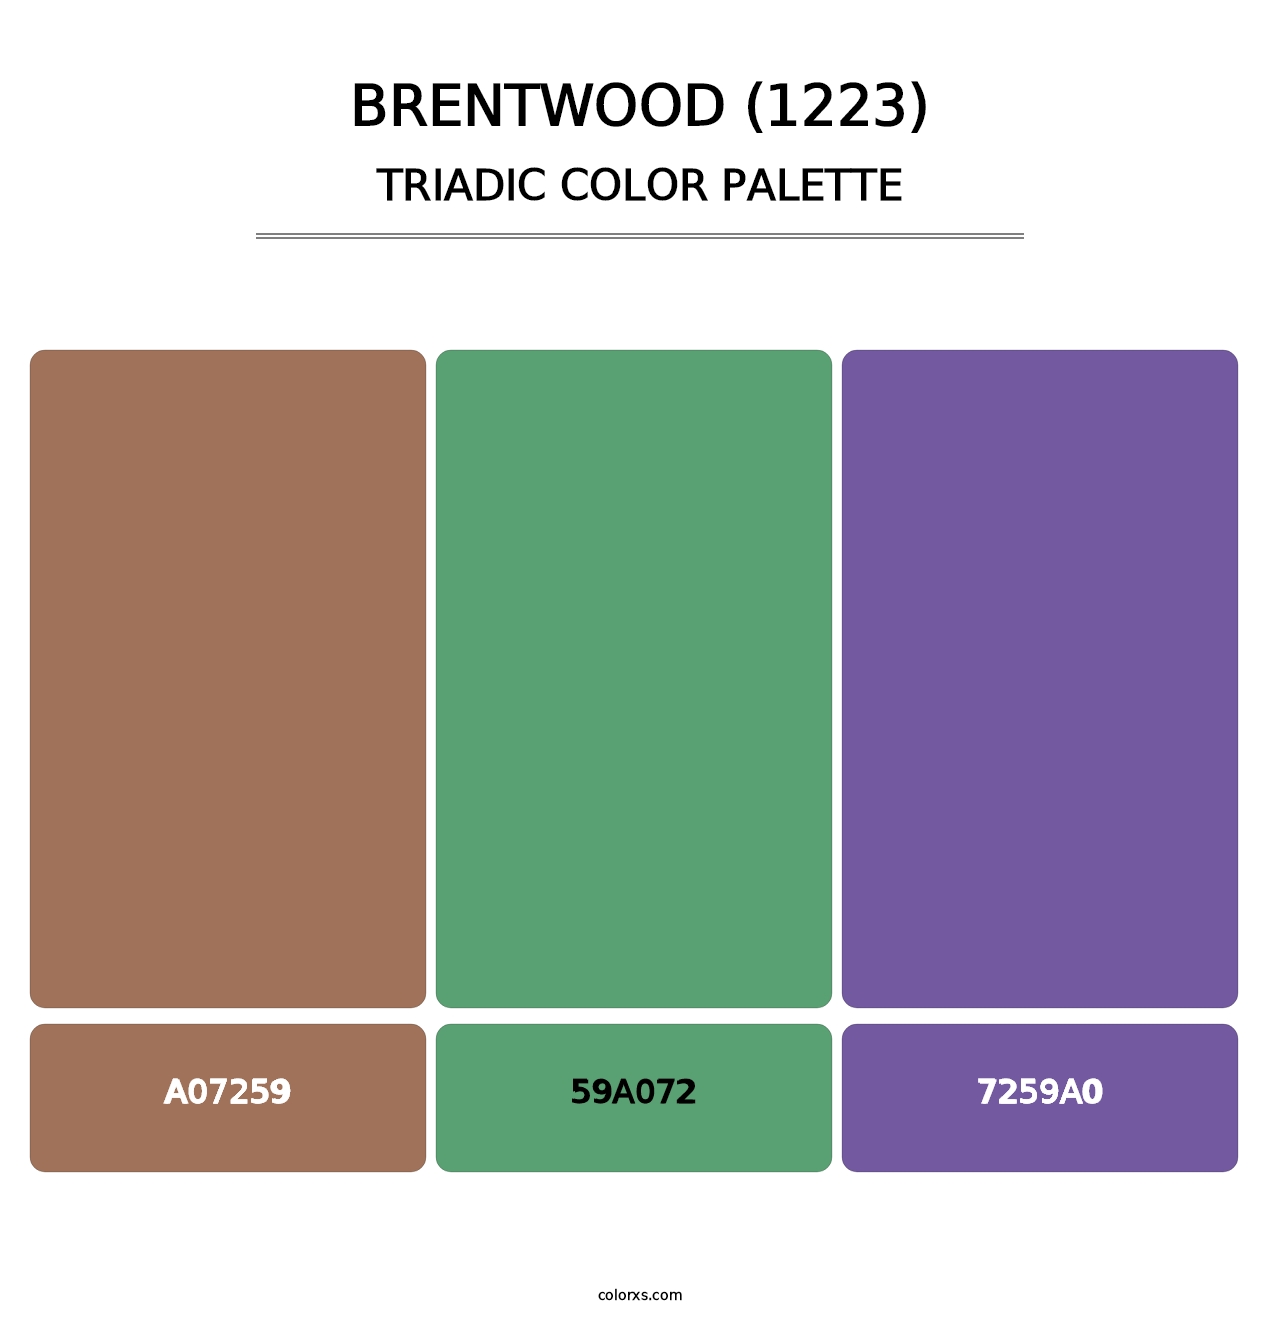 Brentwood (1223) - Triadic Color Palette